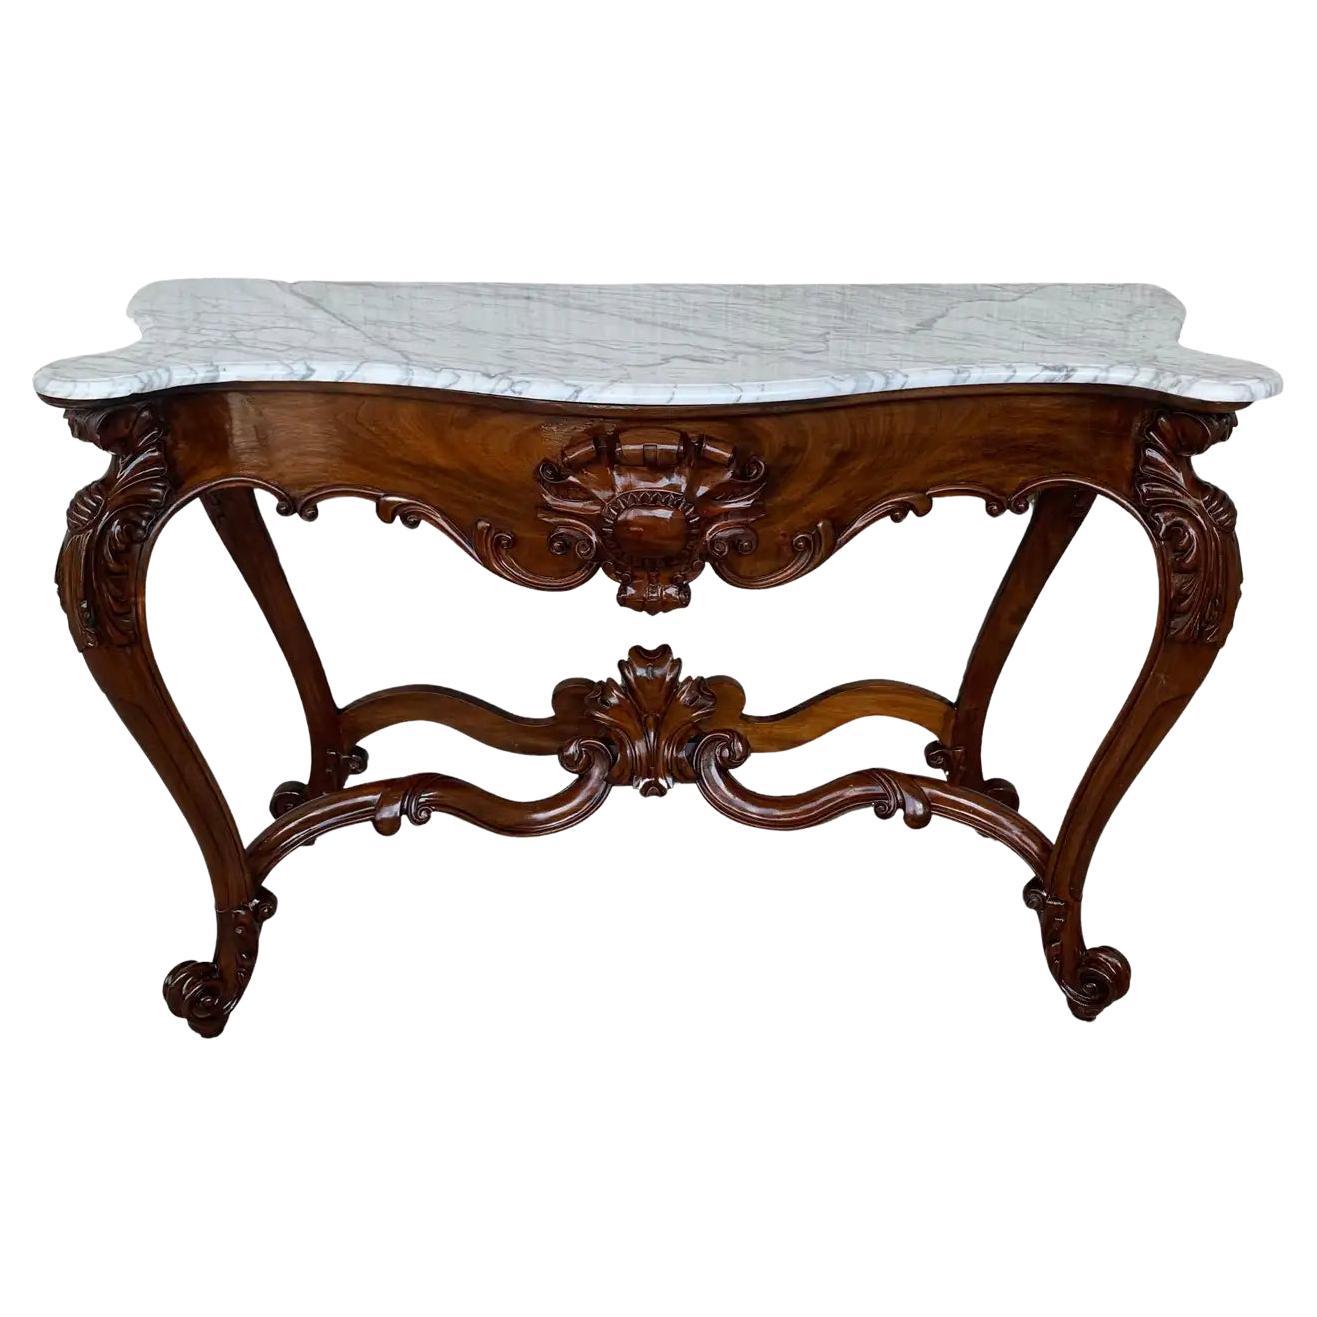 Large French Regency Carved Walnut Console Table with White Marble Top '2 Avai' For Sale